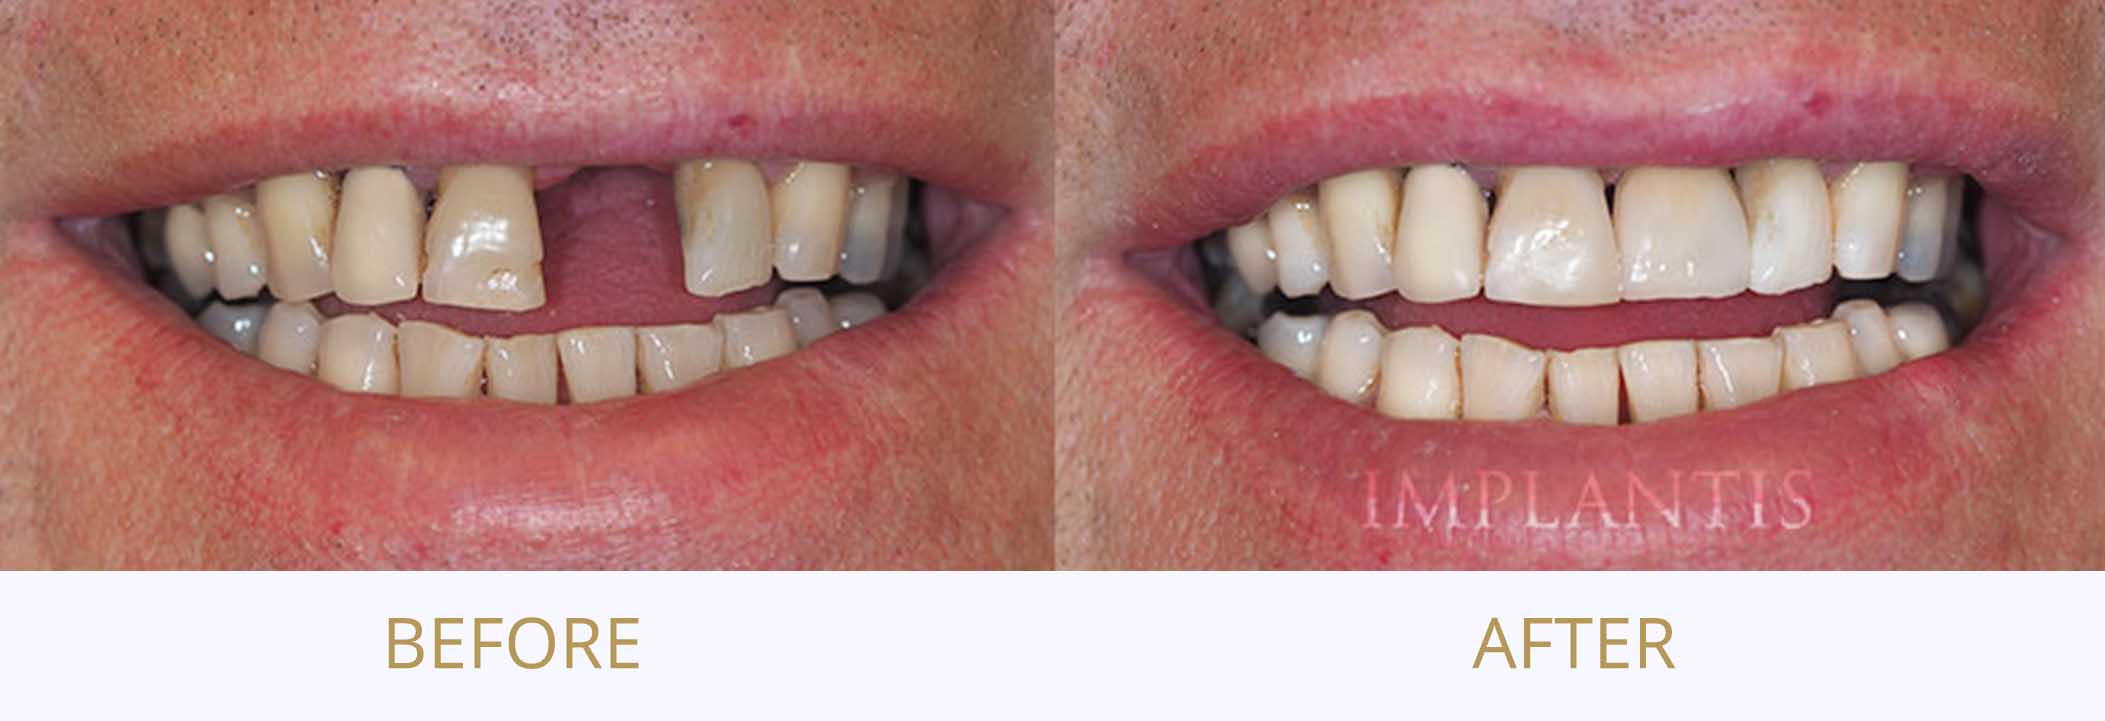 Teeth before and after treatment: Porcelain crown on implant